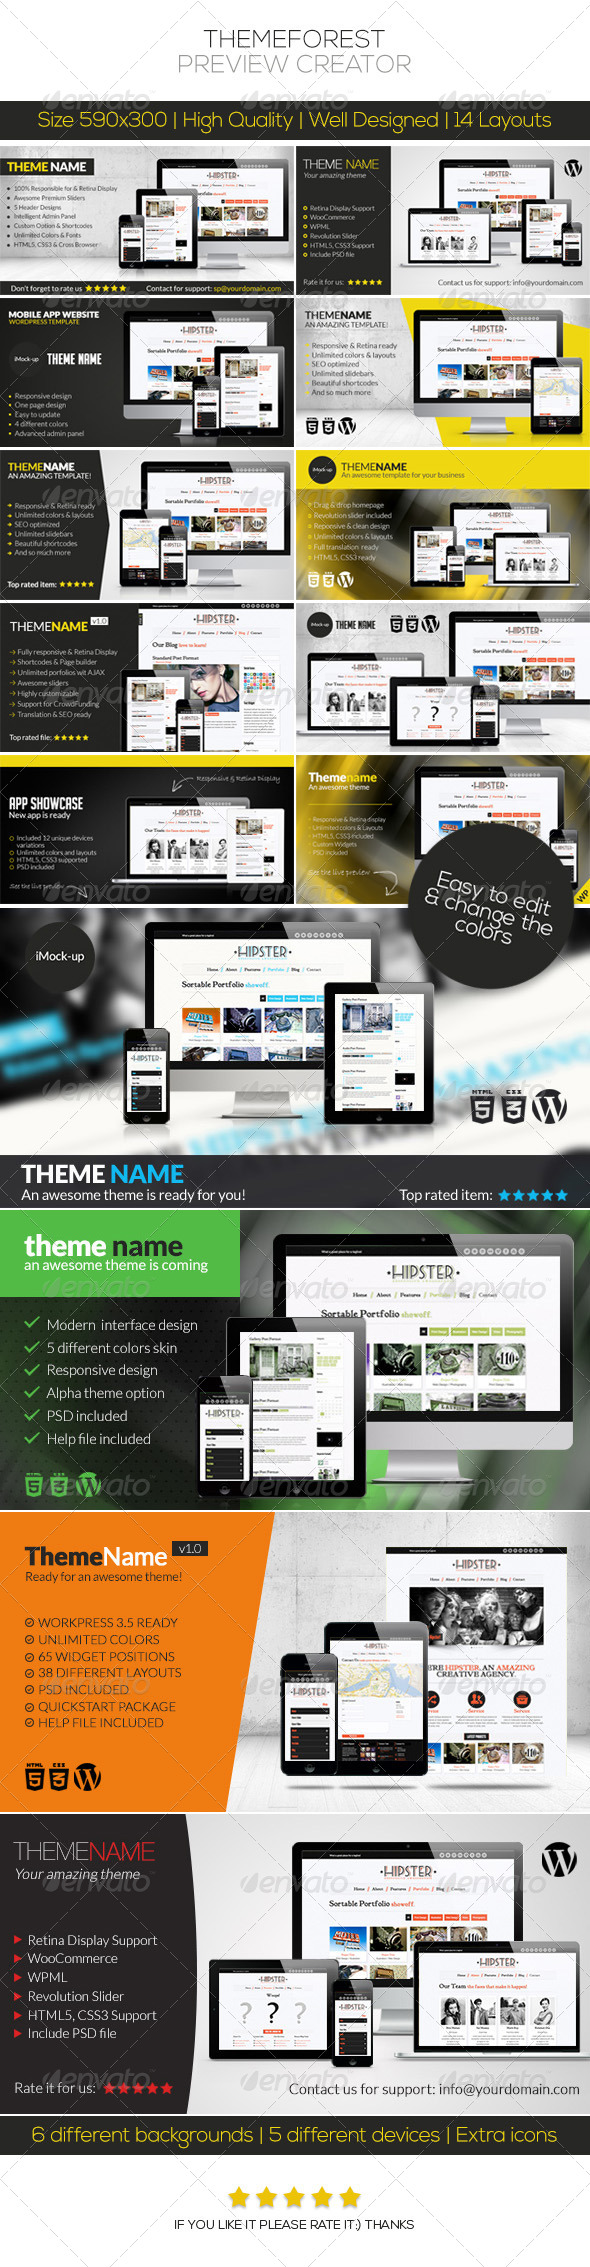 ThemeForest Preview Creator